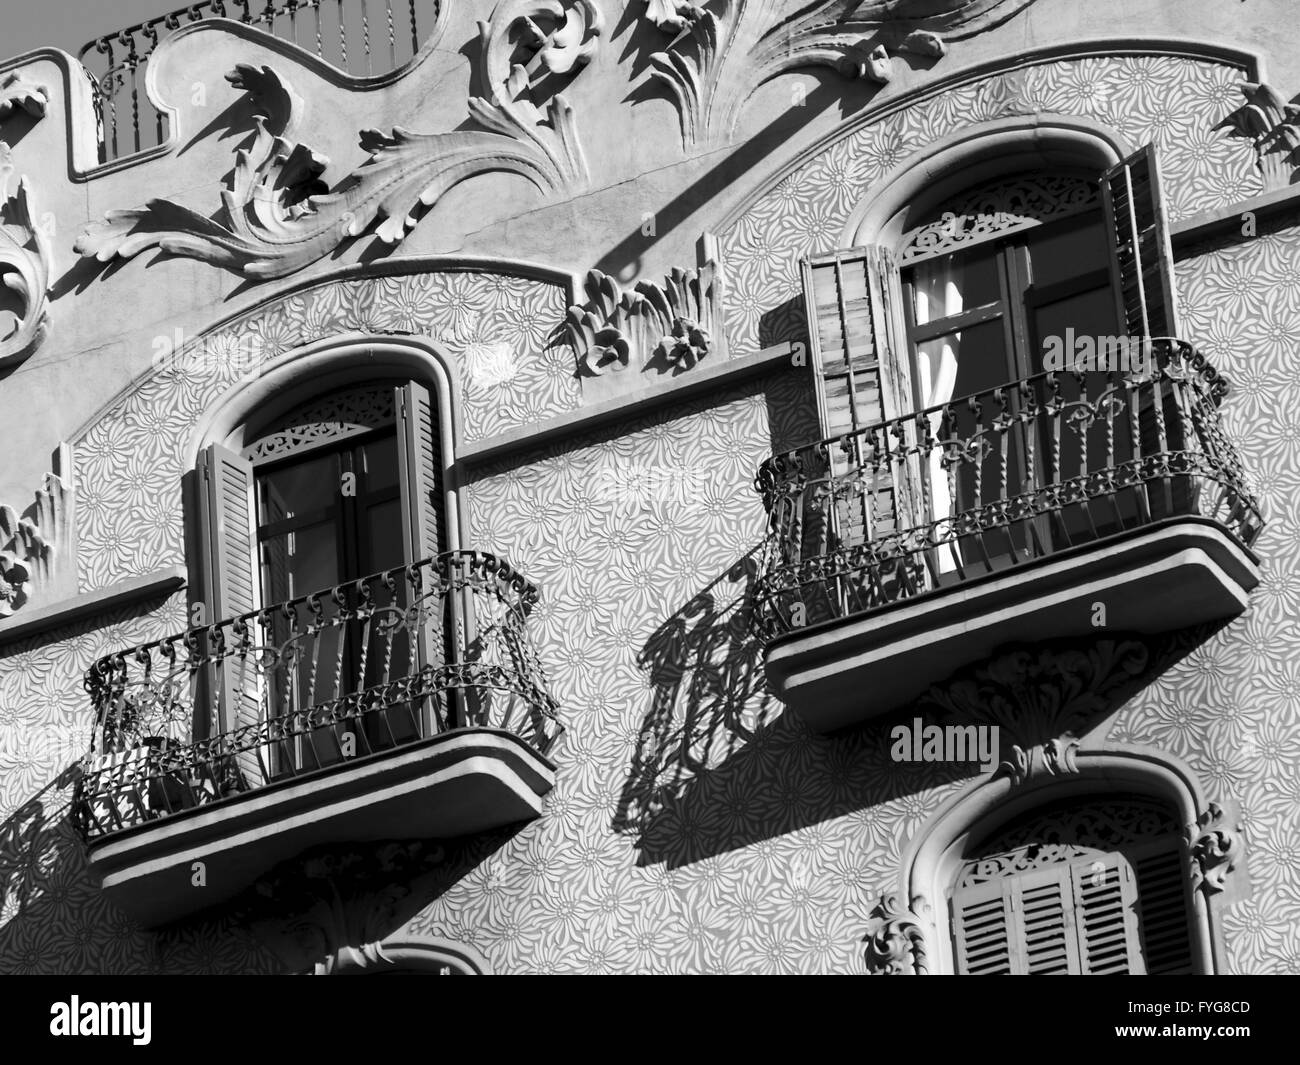 Intricate ironwork balconies on apartments in Barcelona, Spain Stock Photo